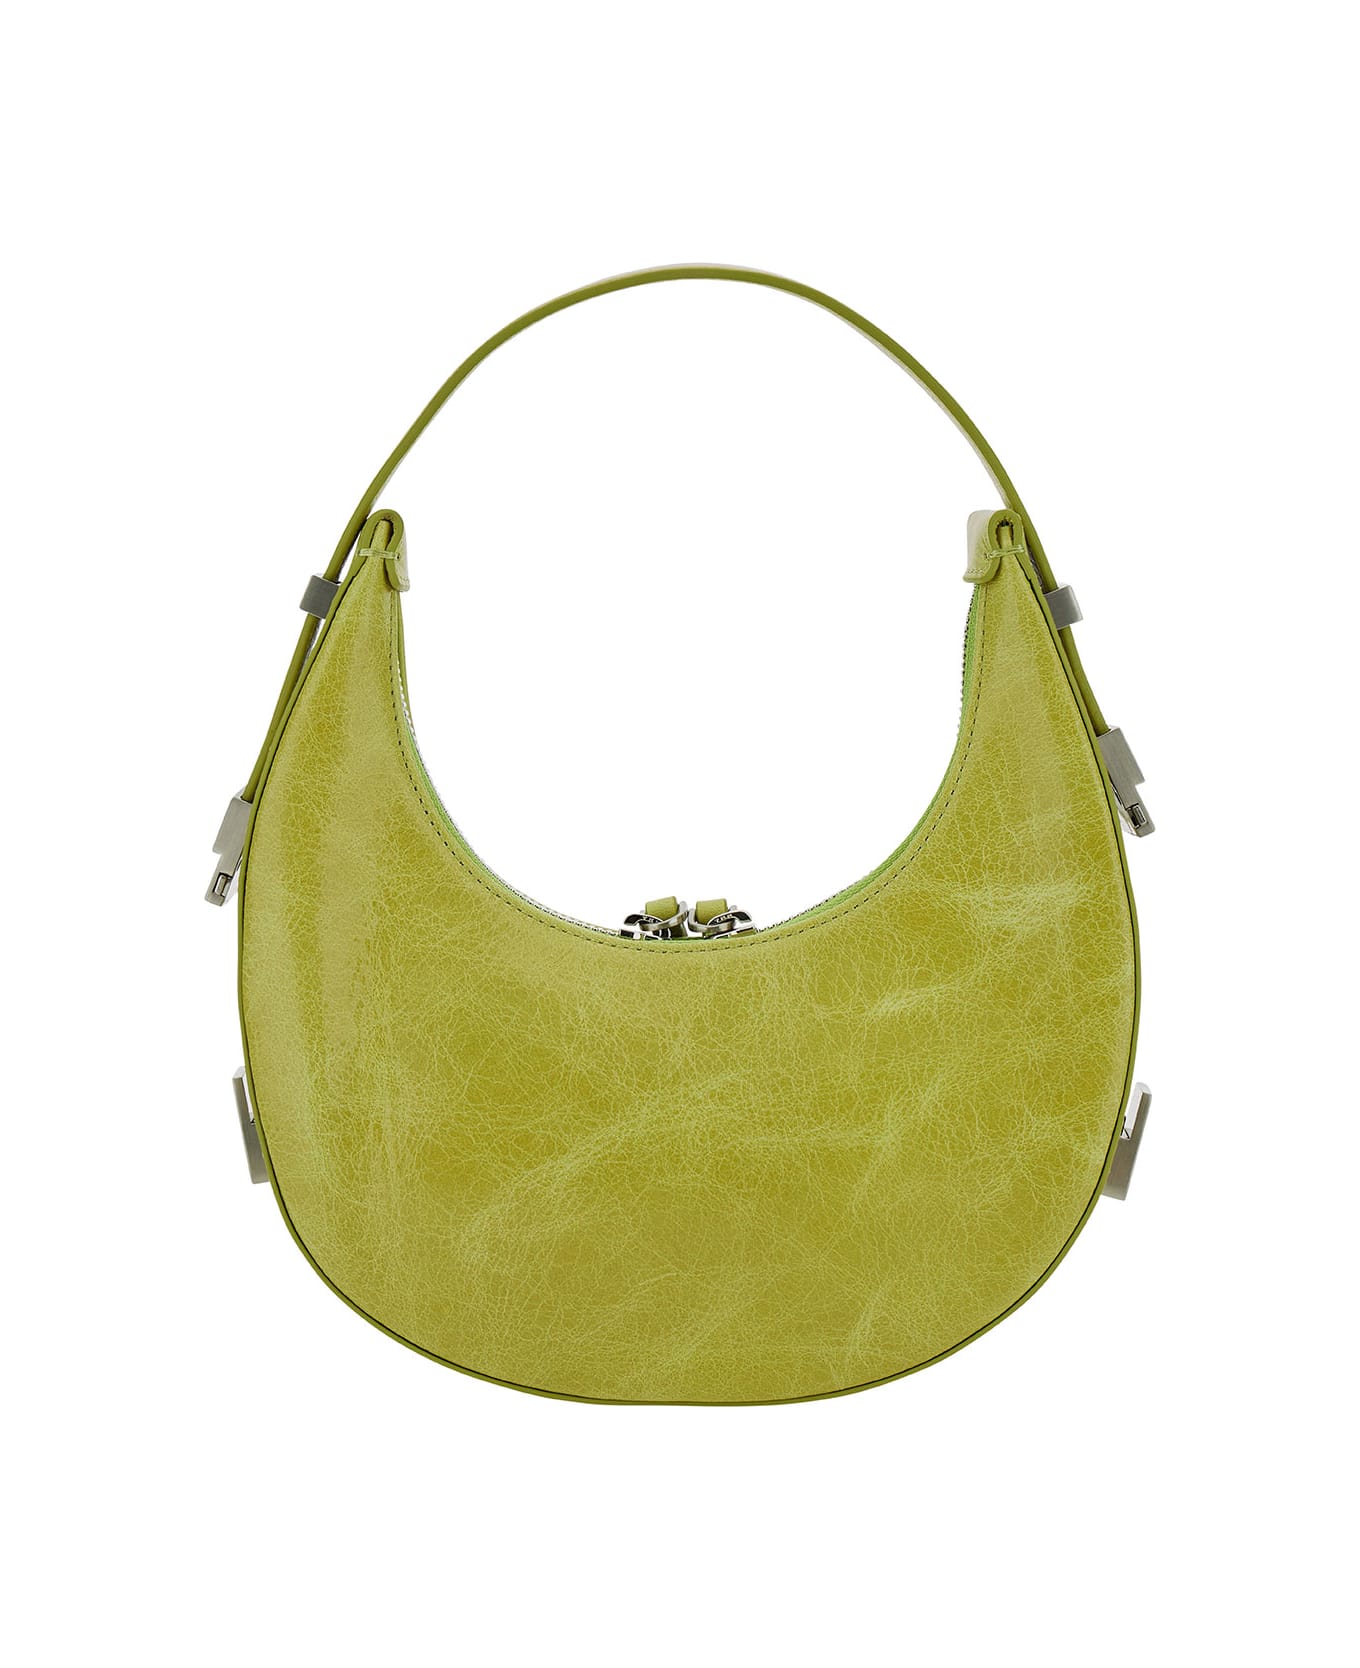 OSOI 'toni Mini' Yellow Shoulder Bag With Engraved Logo In Leather Woman - Yellow トートバッグ